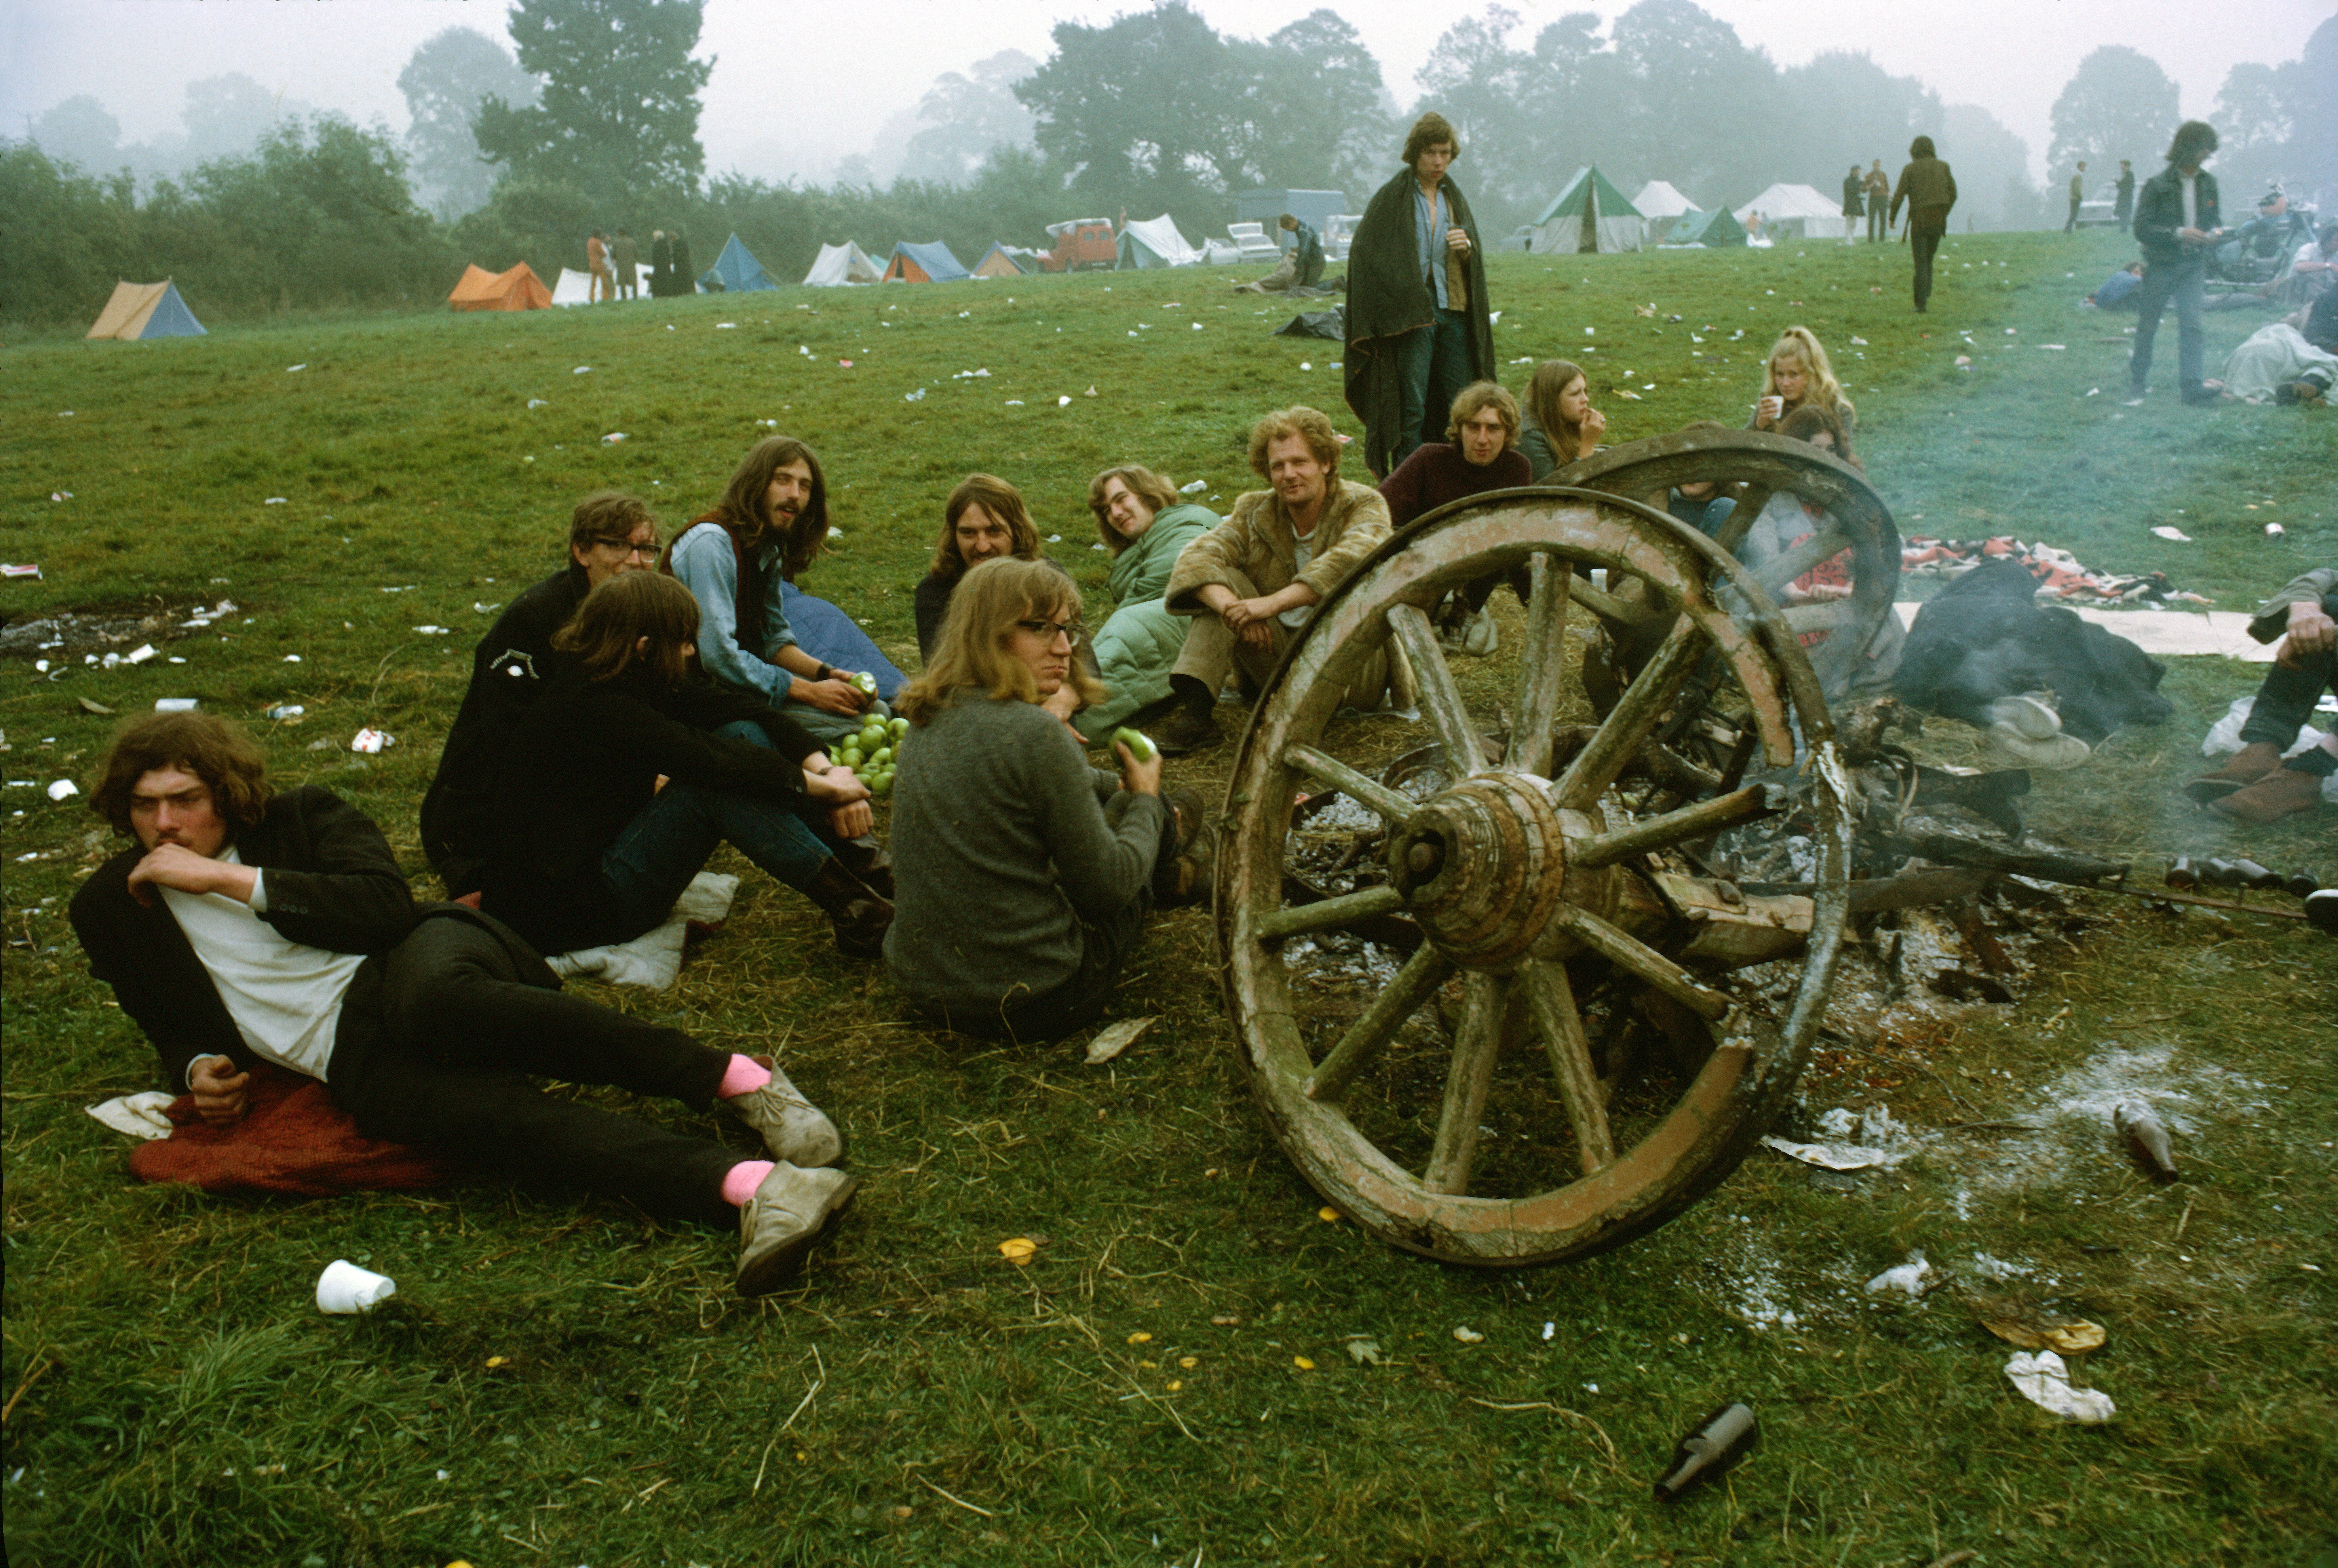 A group eating apples next to a smouldering wooden cart at the first Glastonbury Festival, 1970